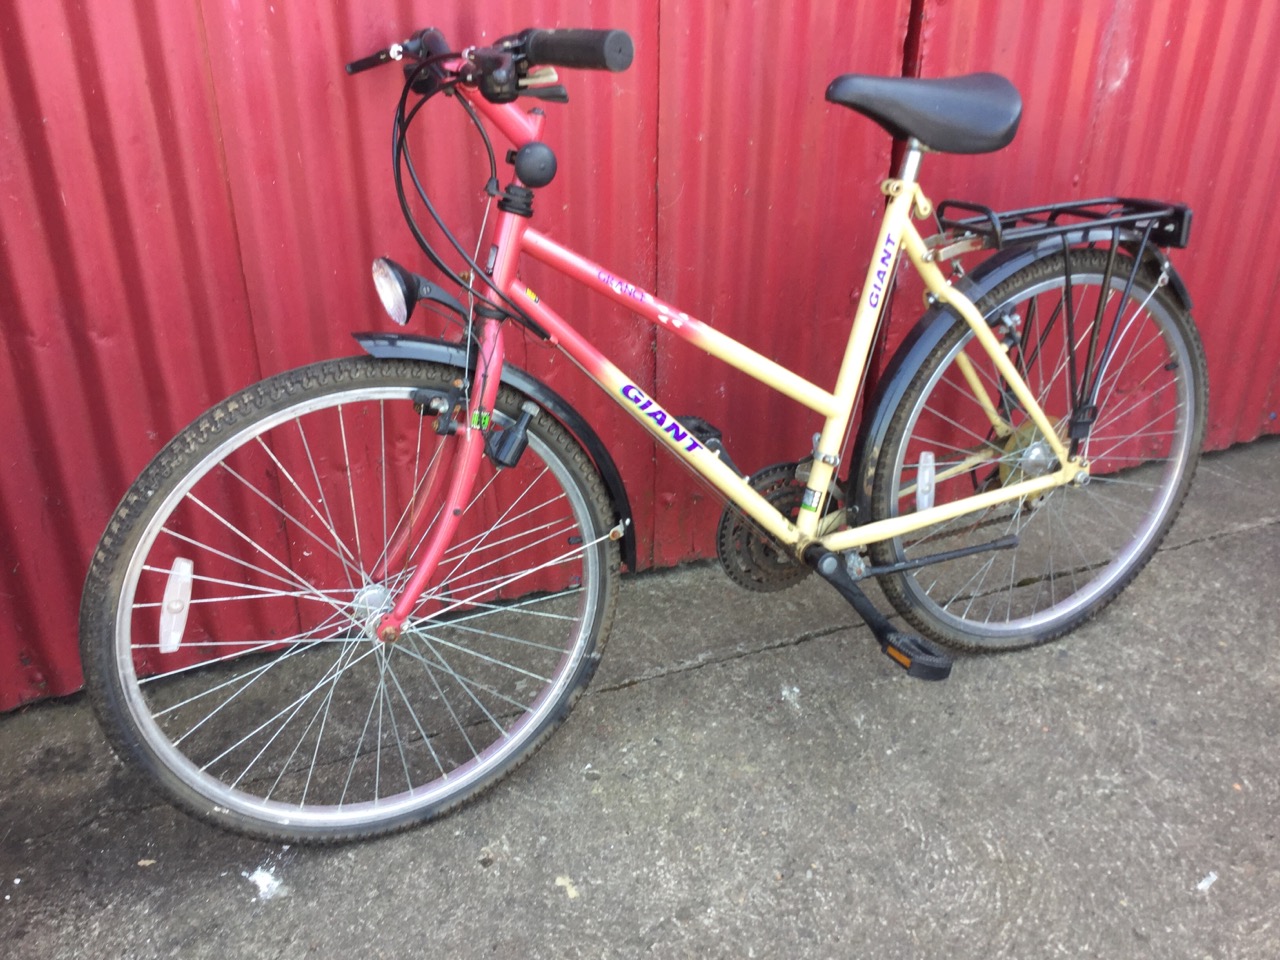 A Giant Grance ladies bicycle with soft seat, pannier rack, Shimano gears, lights with dynamo,